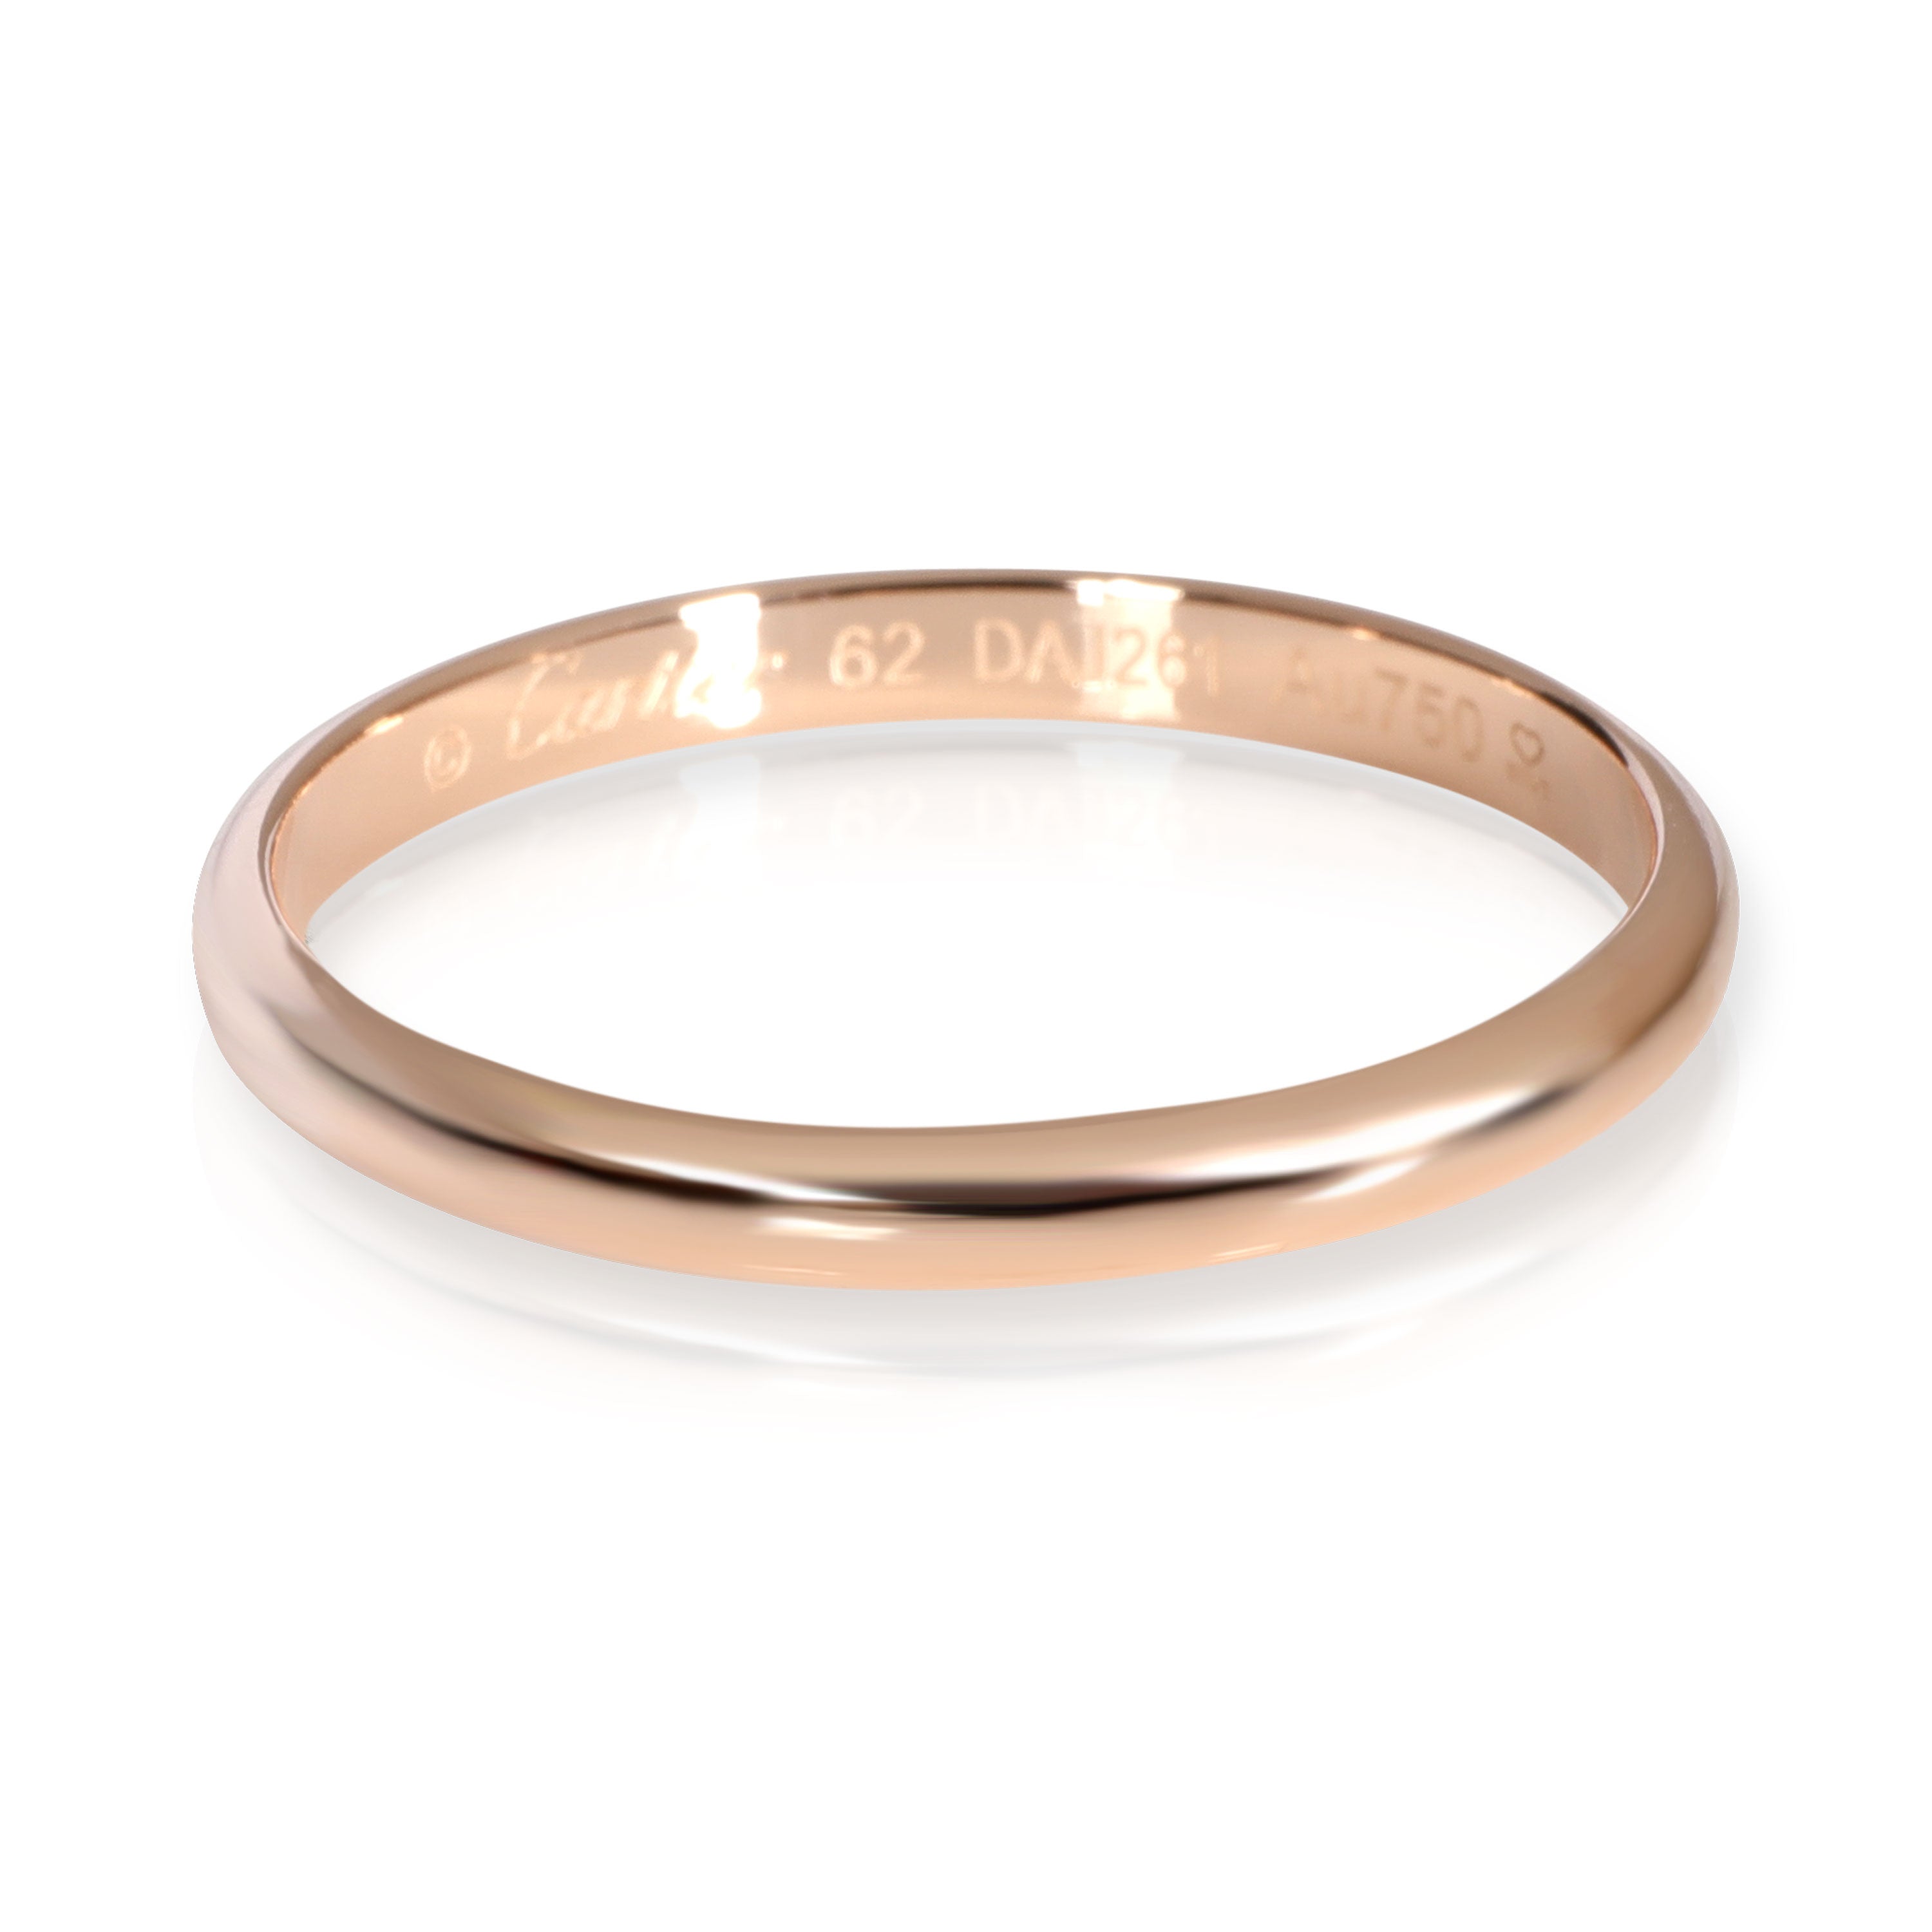 Cartier 1895 Wedding Band in 18K Rose Gold 2.5mm by WP